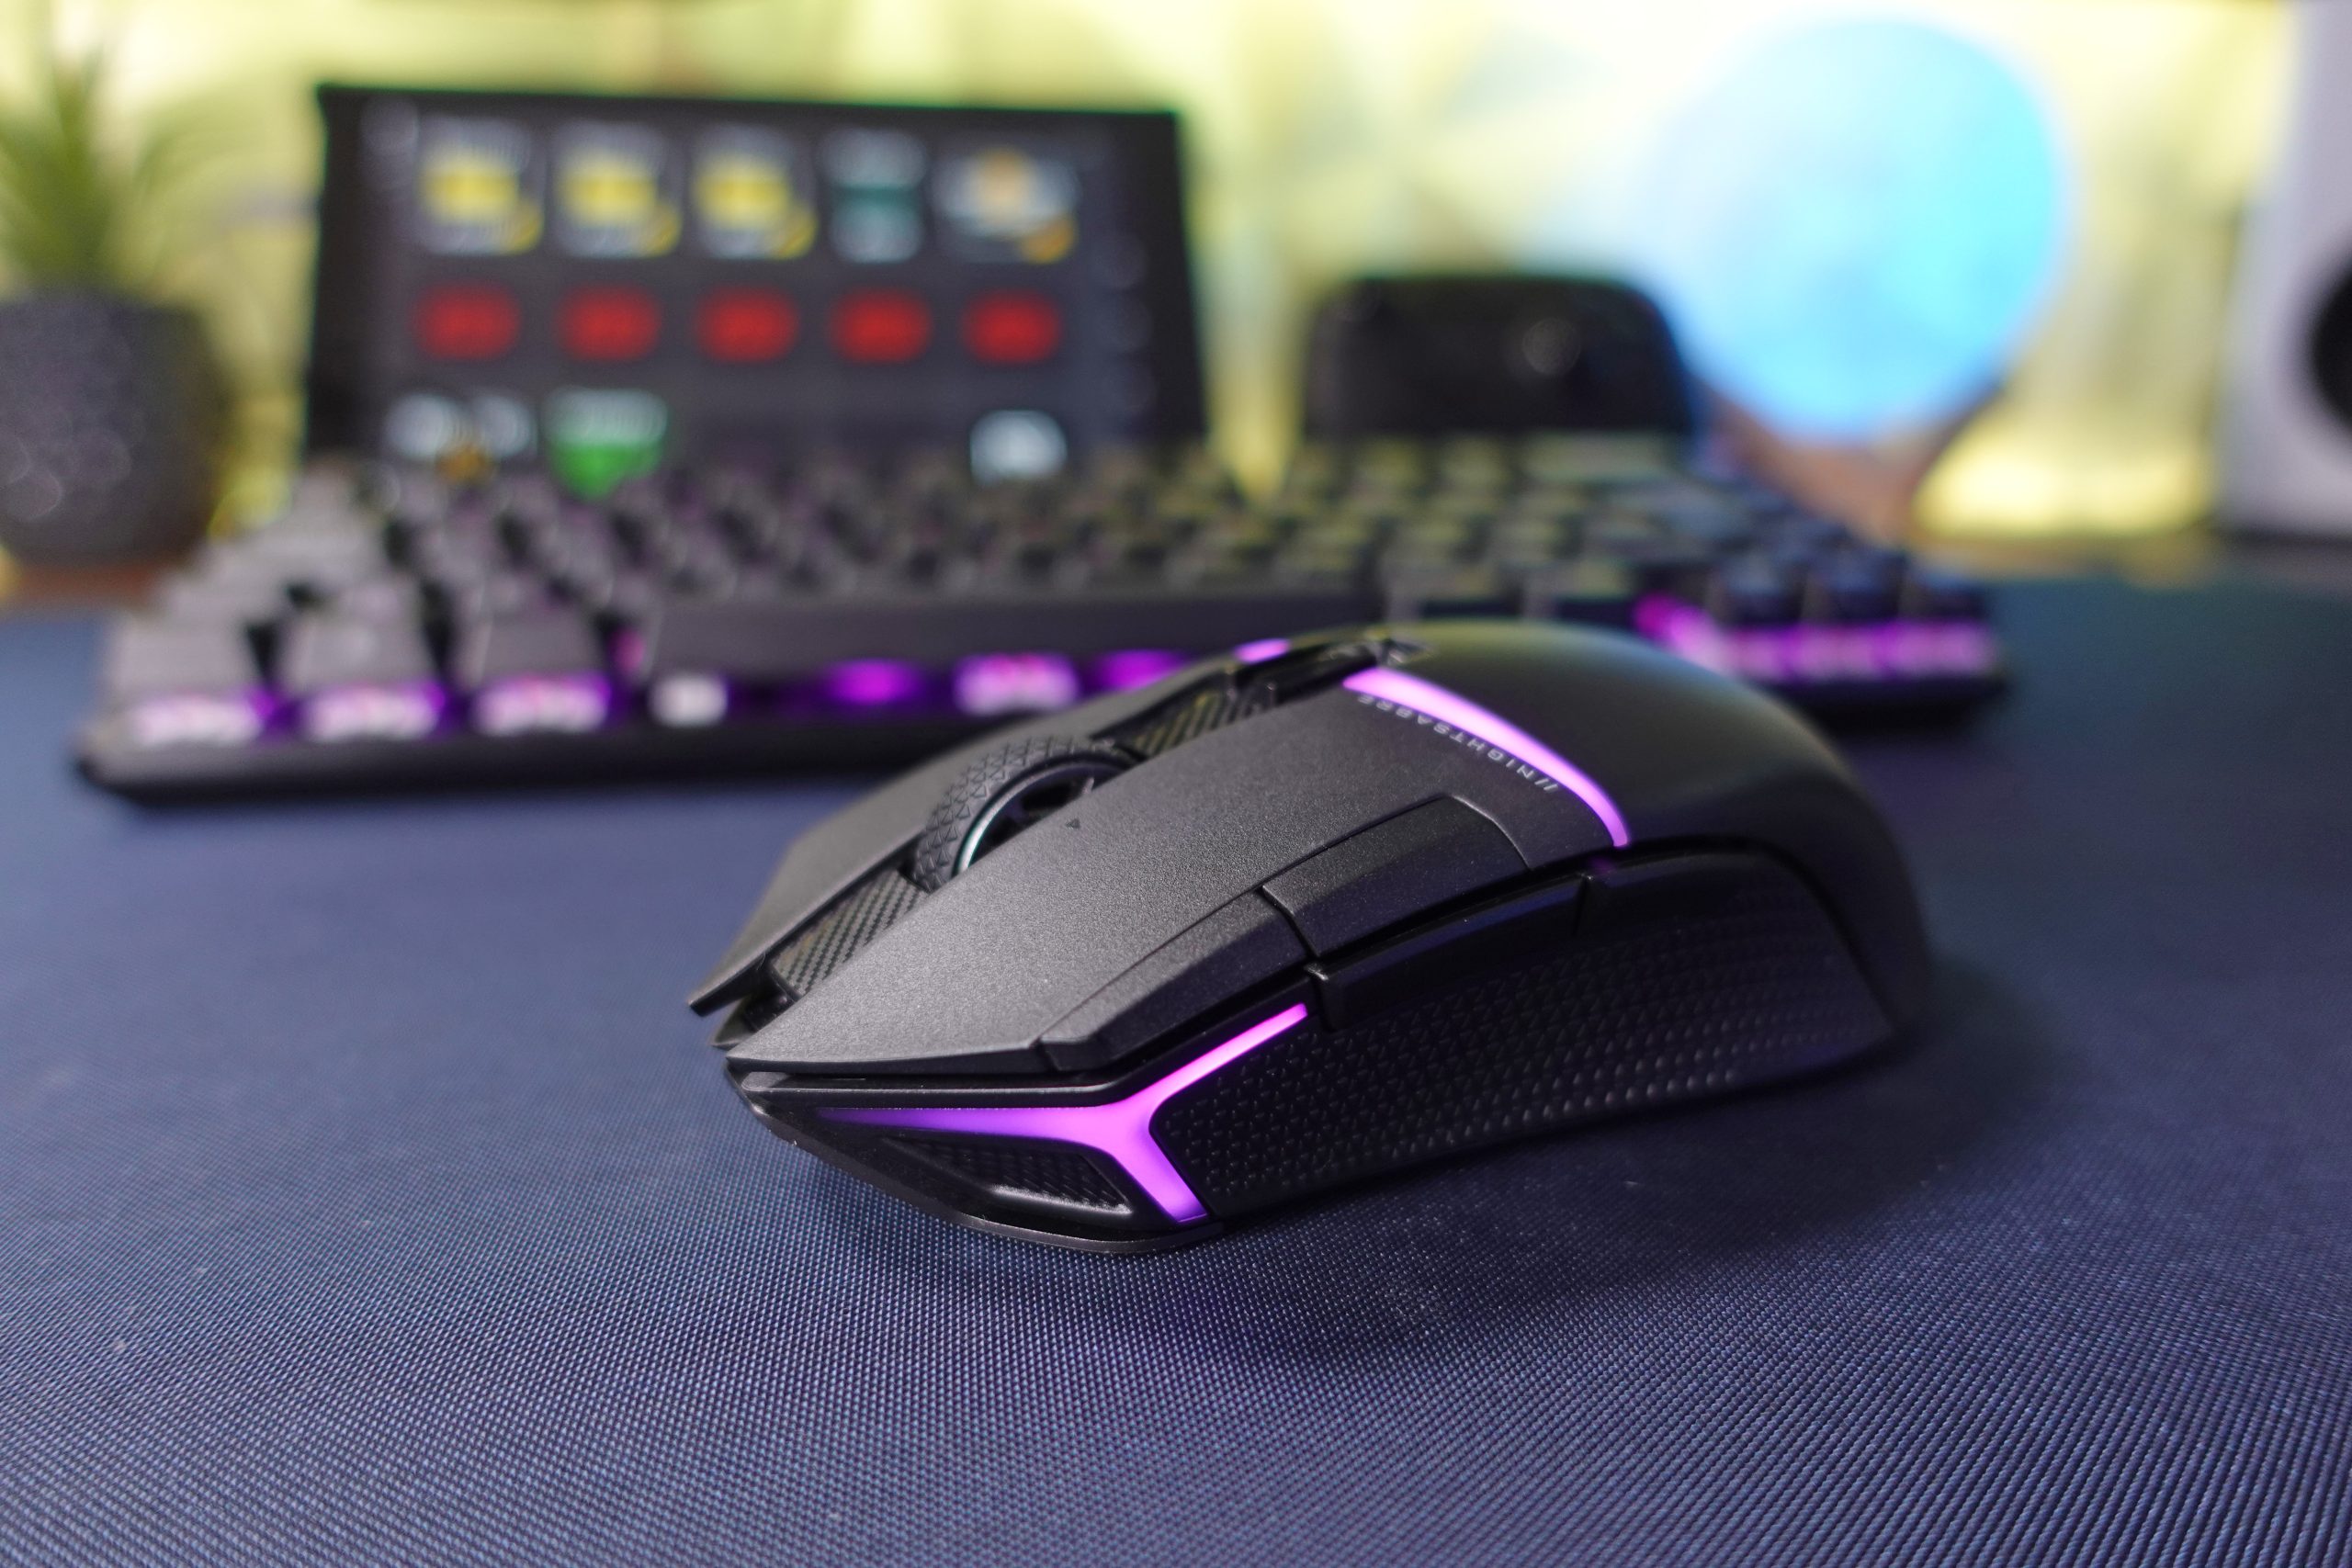 Corsair Nightsabre Wireless mouse review